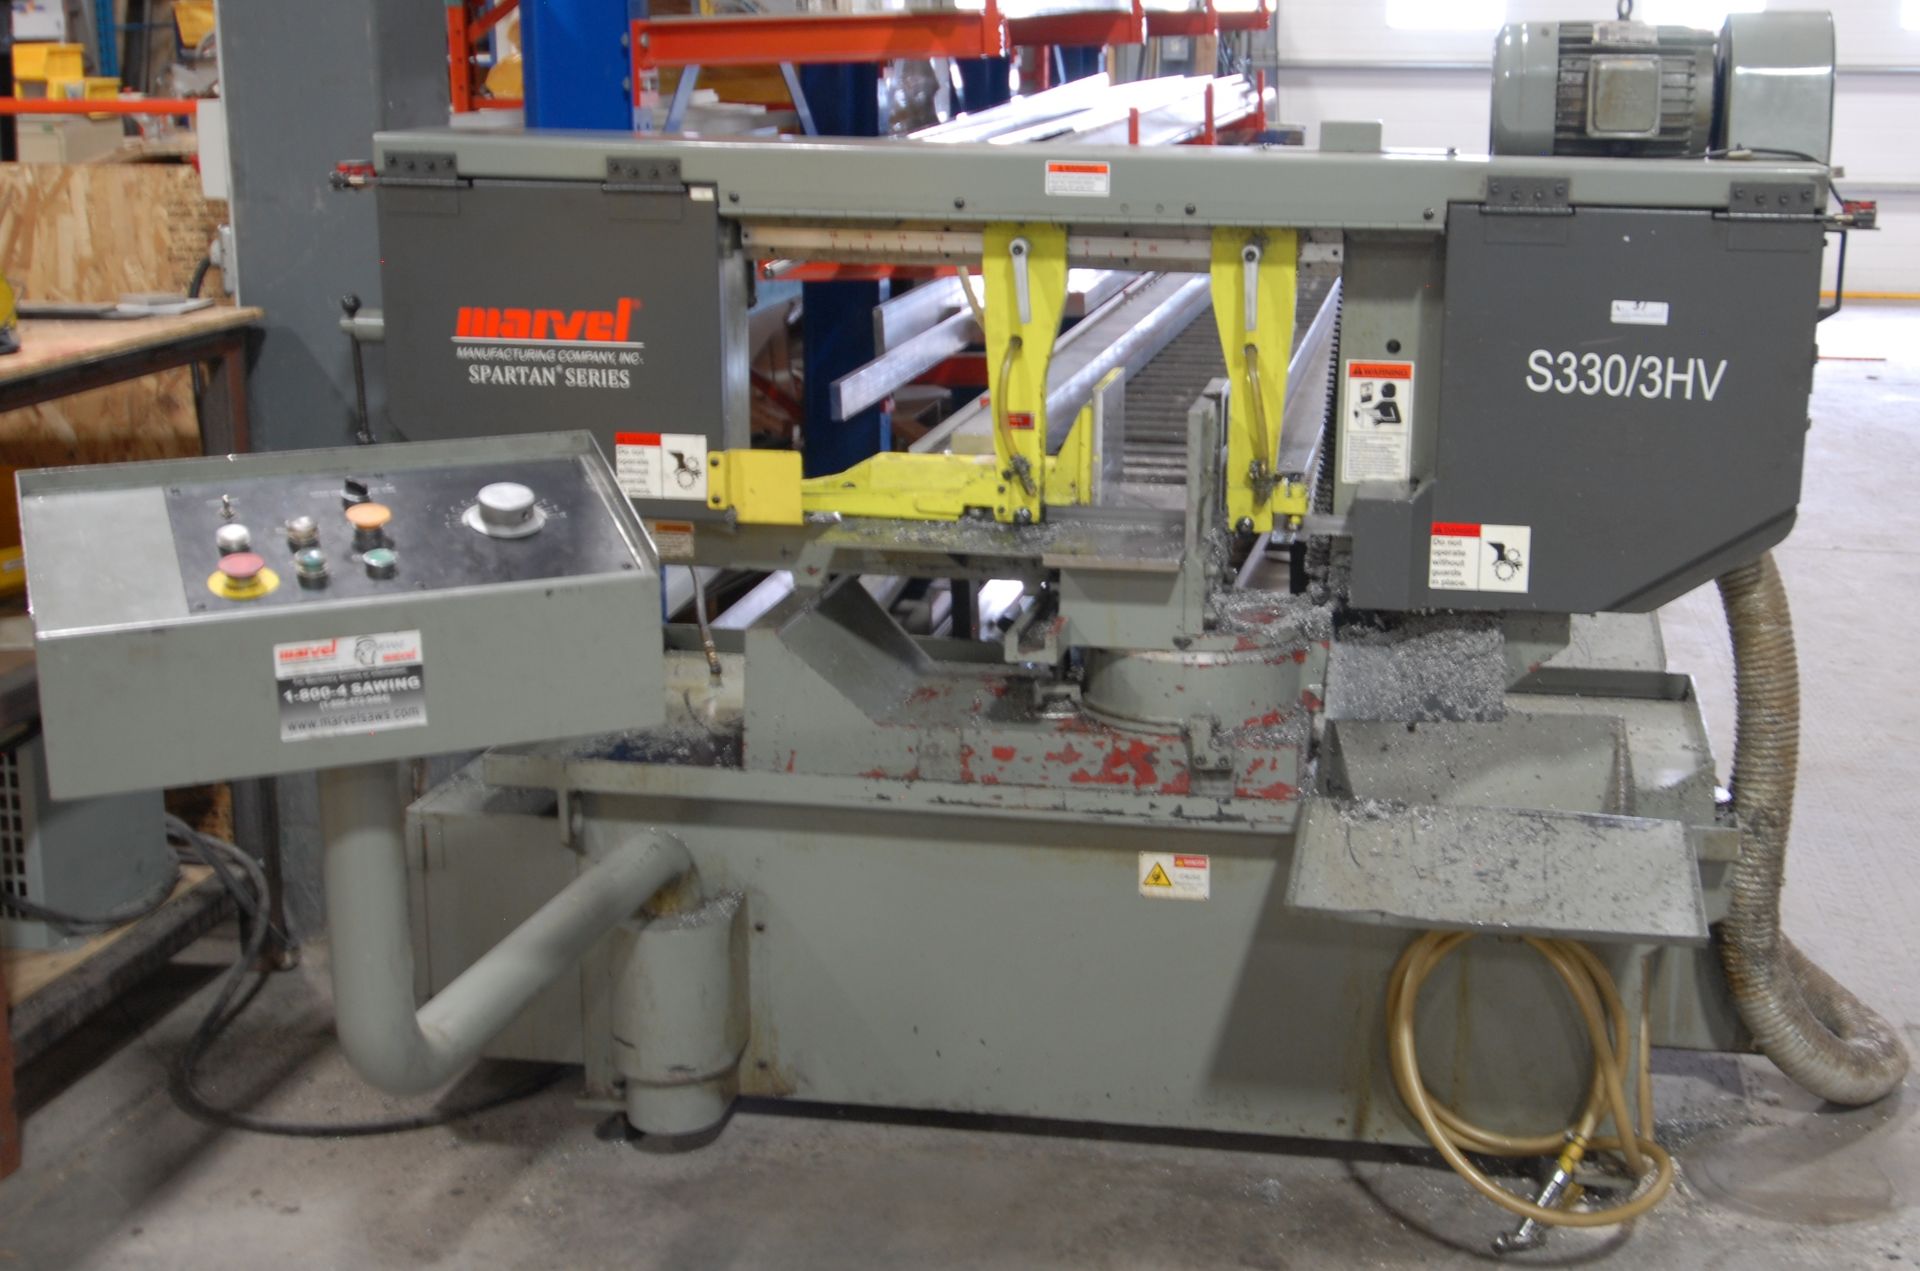 MARVEL S330/3HV HIGH SPEED METAL CUTTING HORIZONTAL BAND SAW WITH MITERING CAPABILITY TO 60 DEGREES,